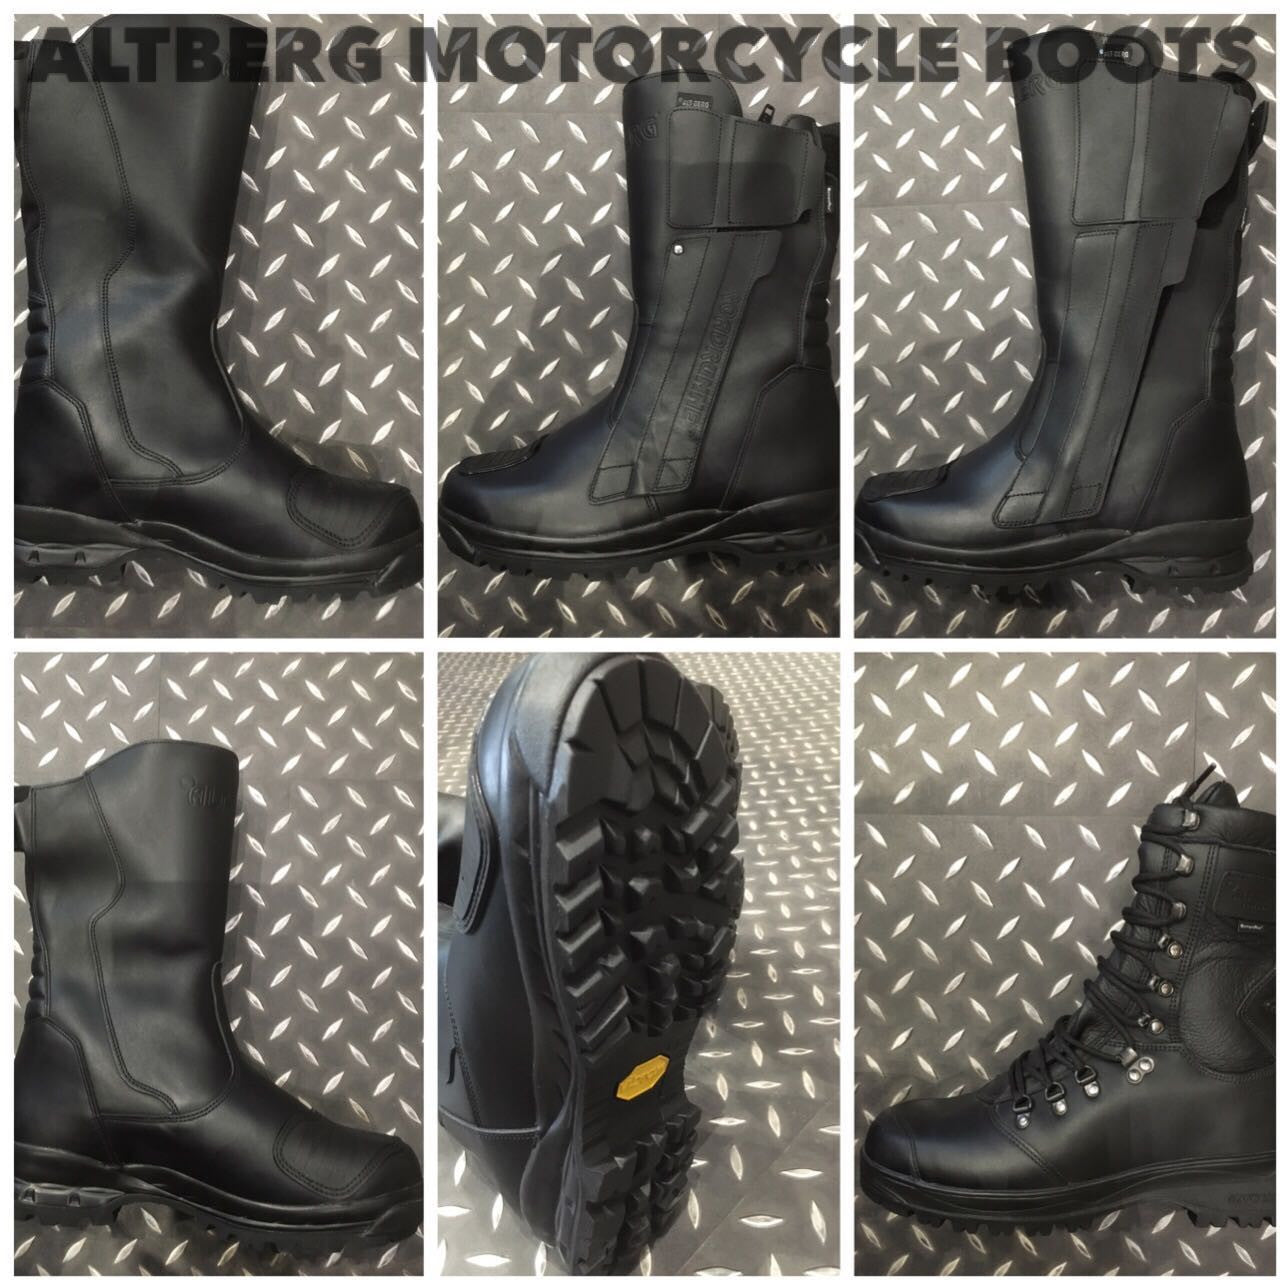 ALTBERG MOTORCYCLE BOOTS